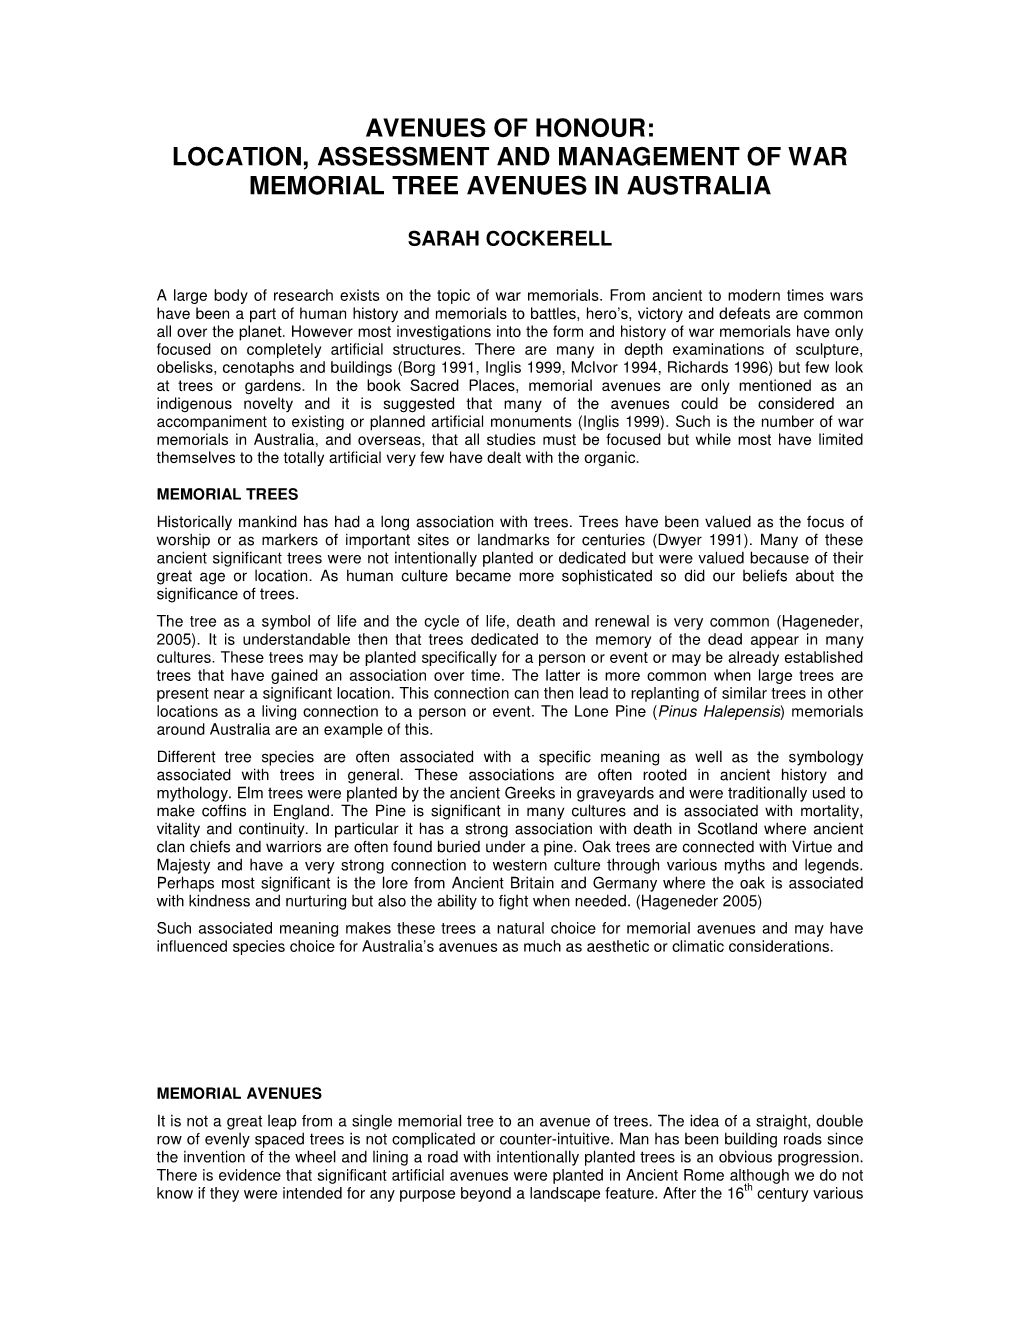 Avenues of Honour: Location, Assessment and Management of War Memorial Tree Avenues in Australia